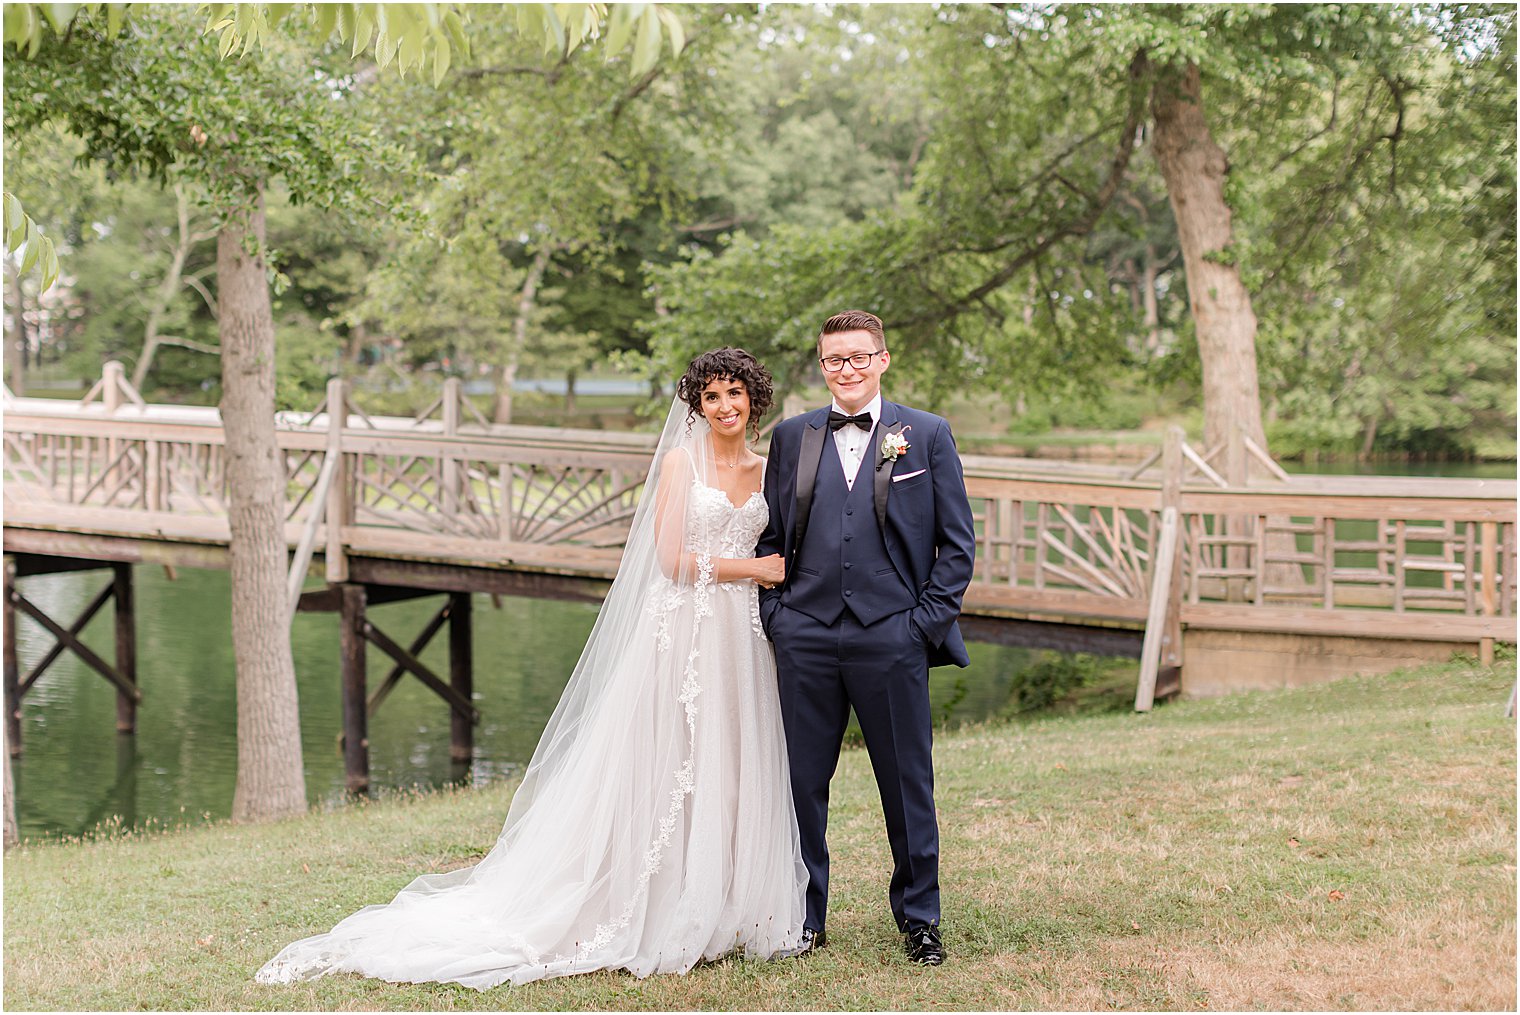 newlyweds stand together in New Jersey park 